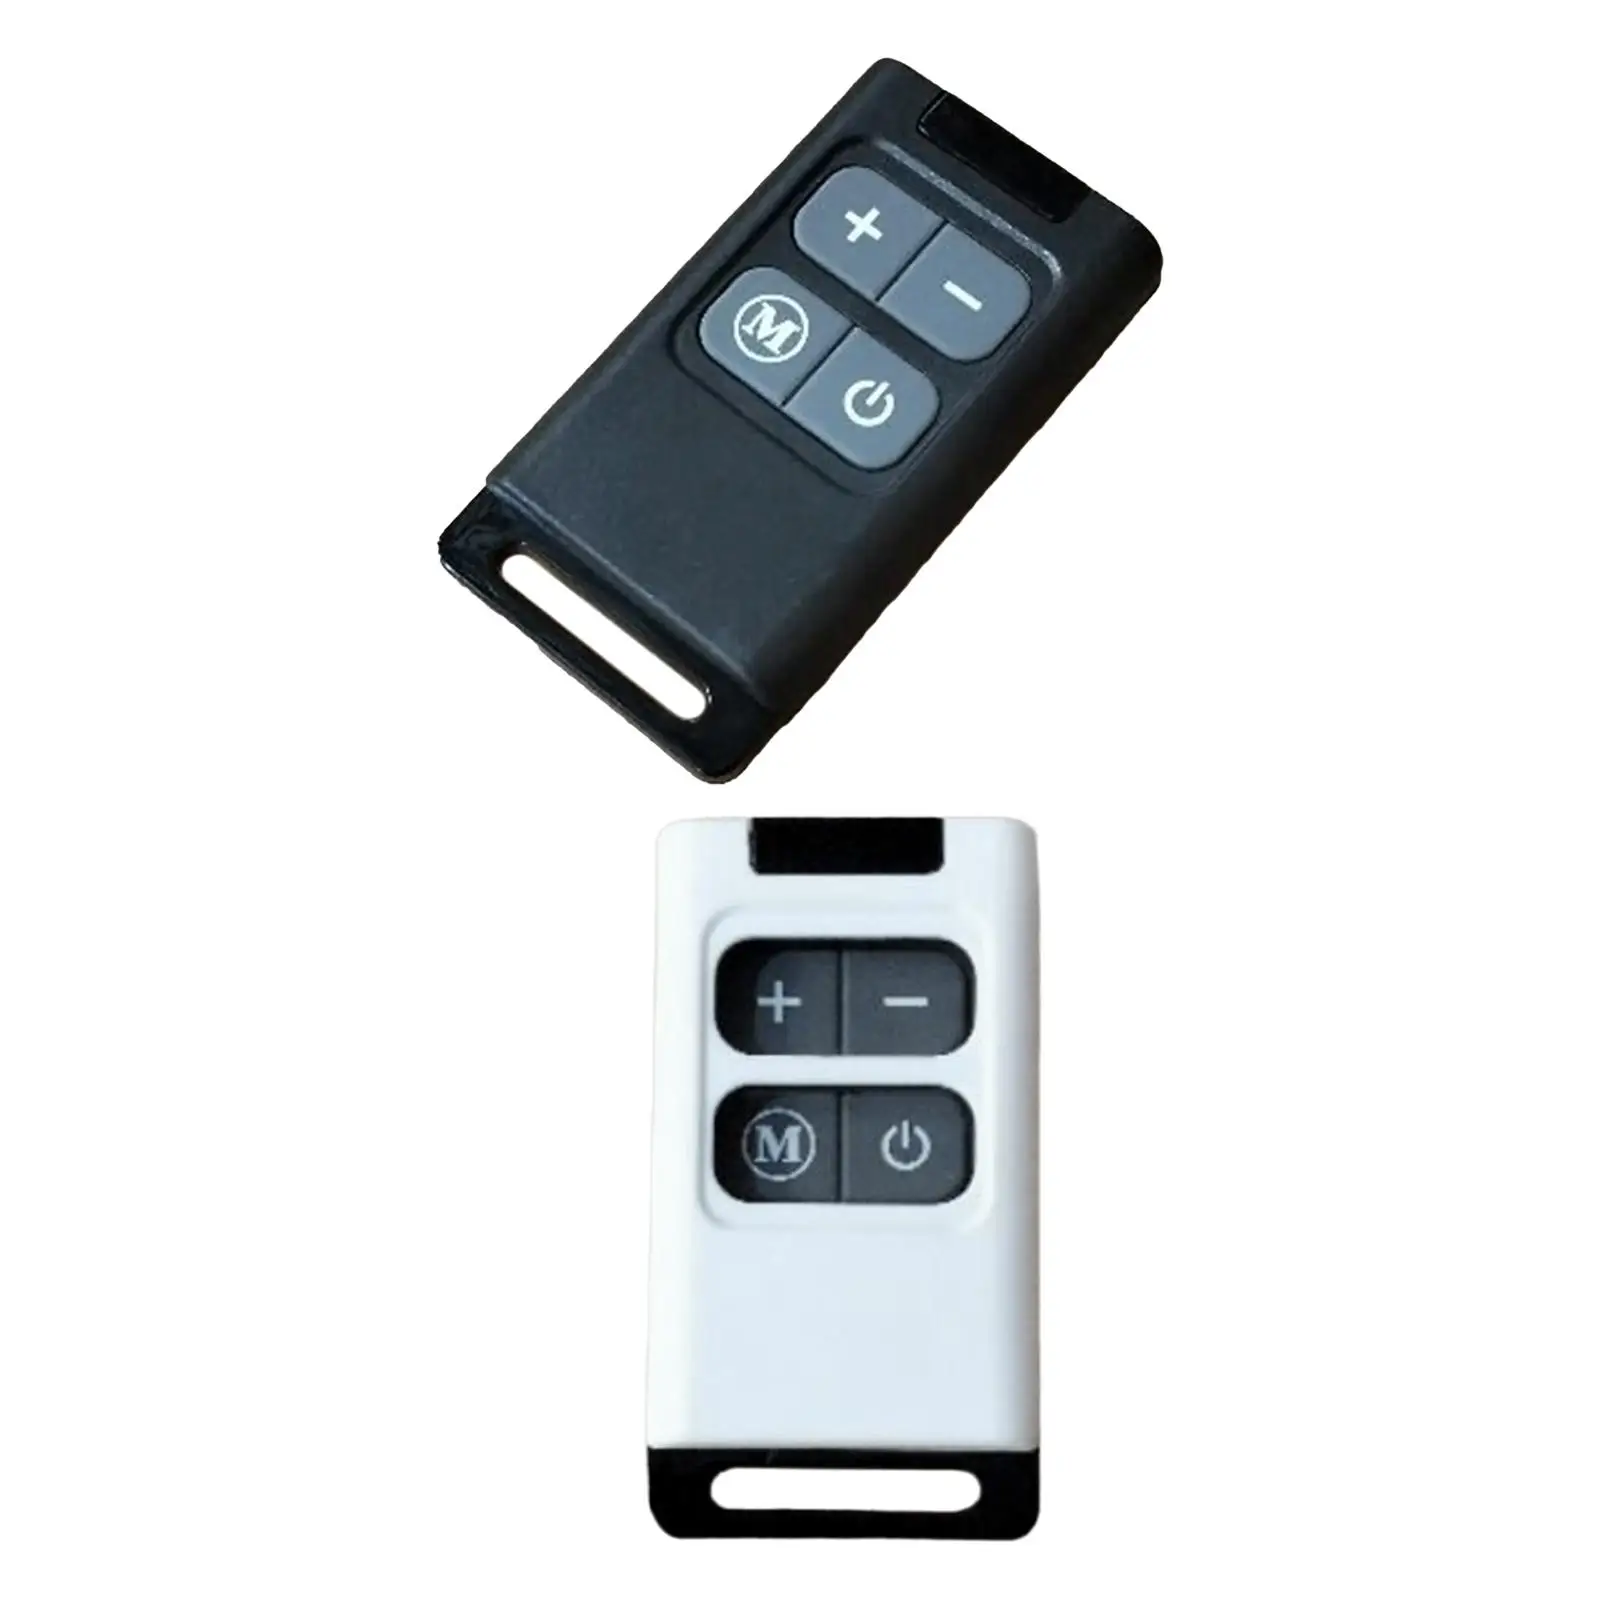 Car Parking Heater Remote Control for Heating Accessories Automotive Car Diesels Air Heater Parking Heater Vehicle Premium